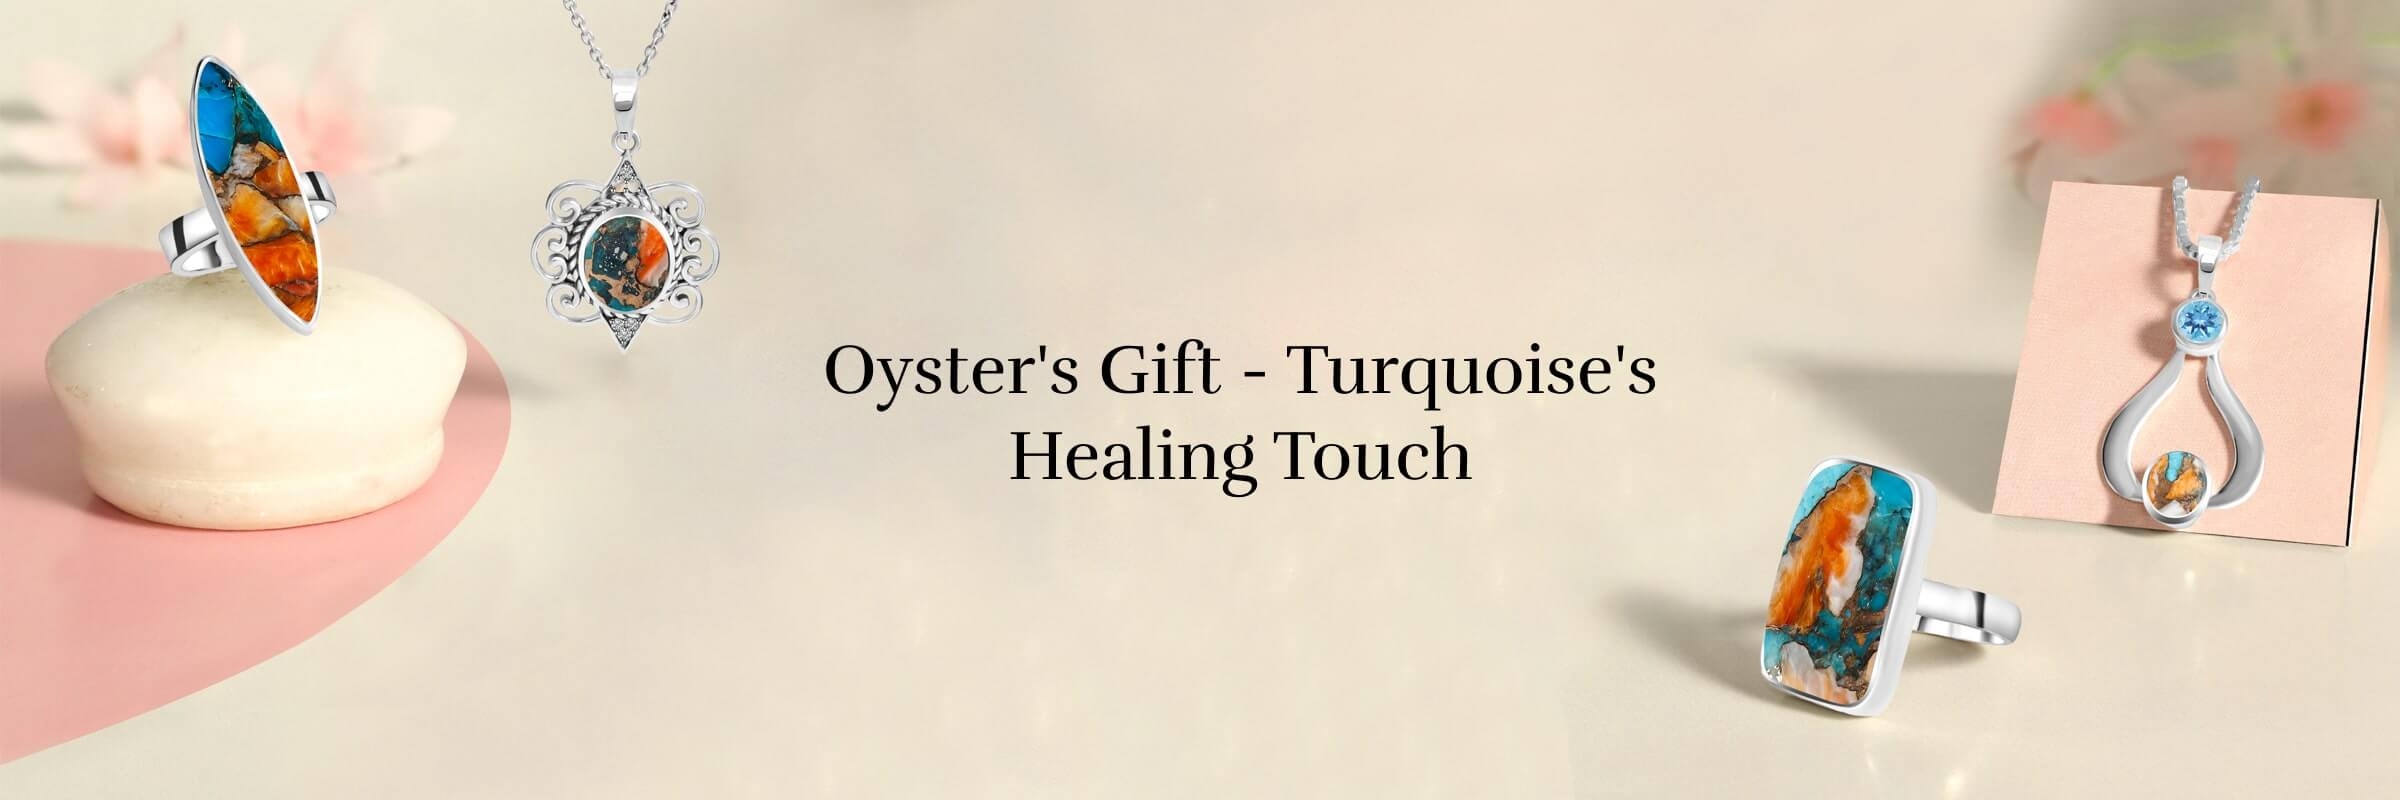 Oyster Turquoise Physical Healing properties